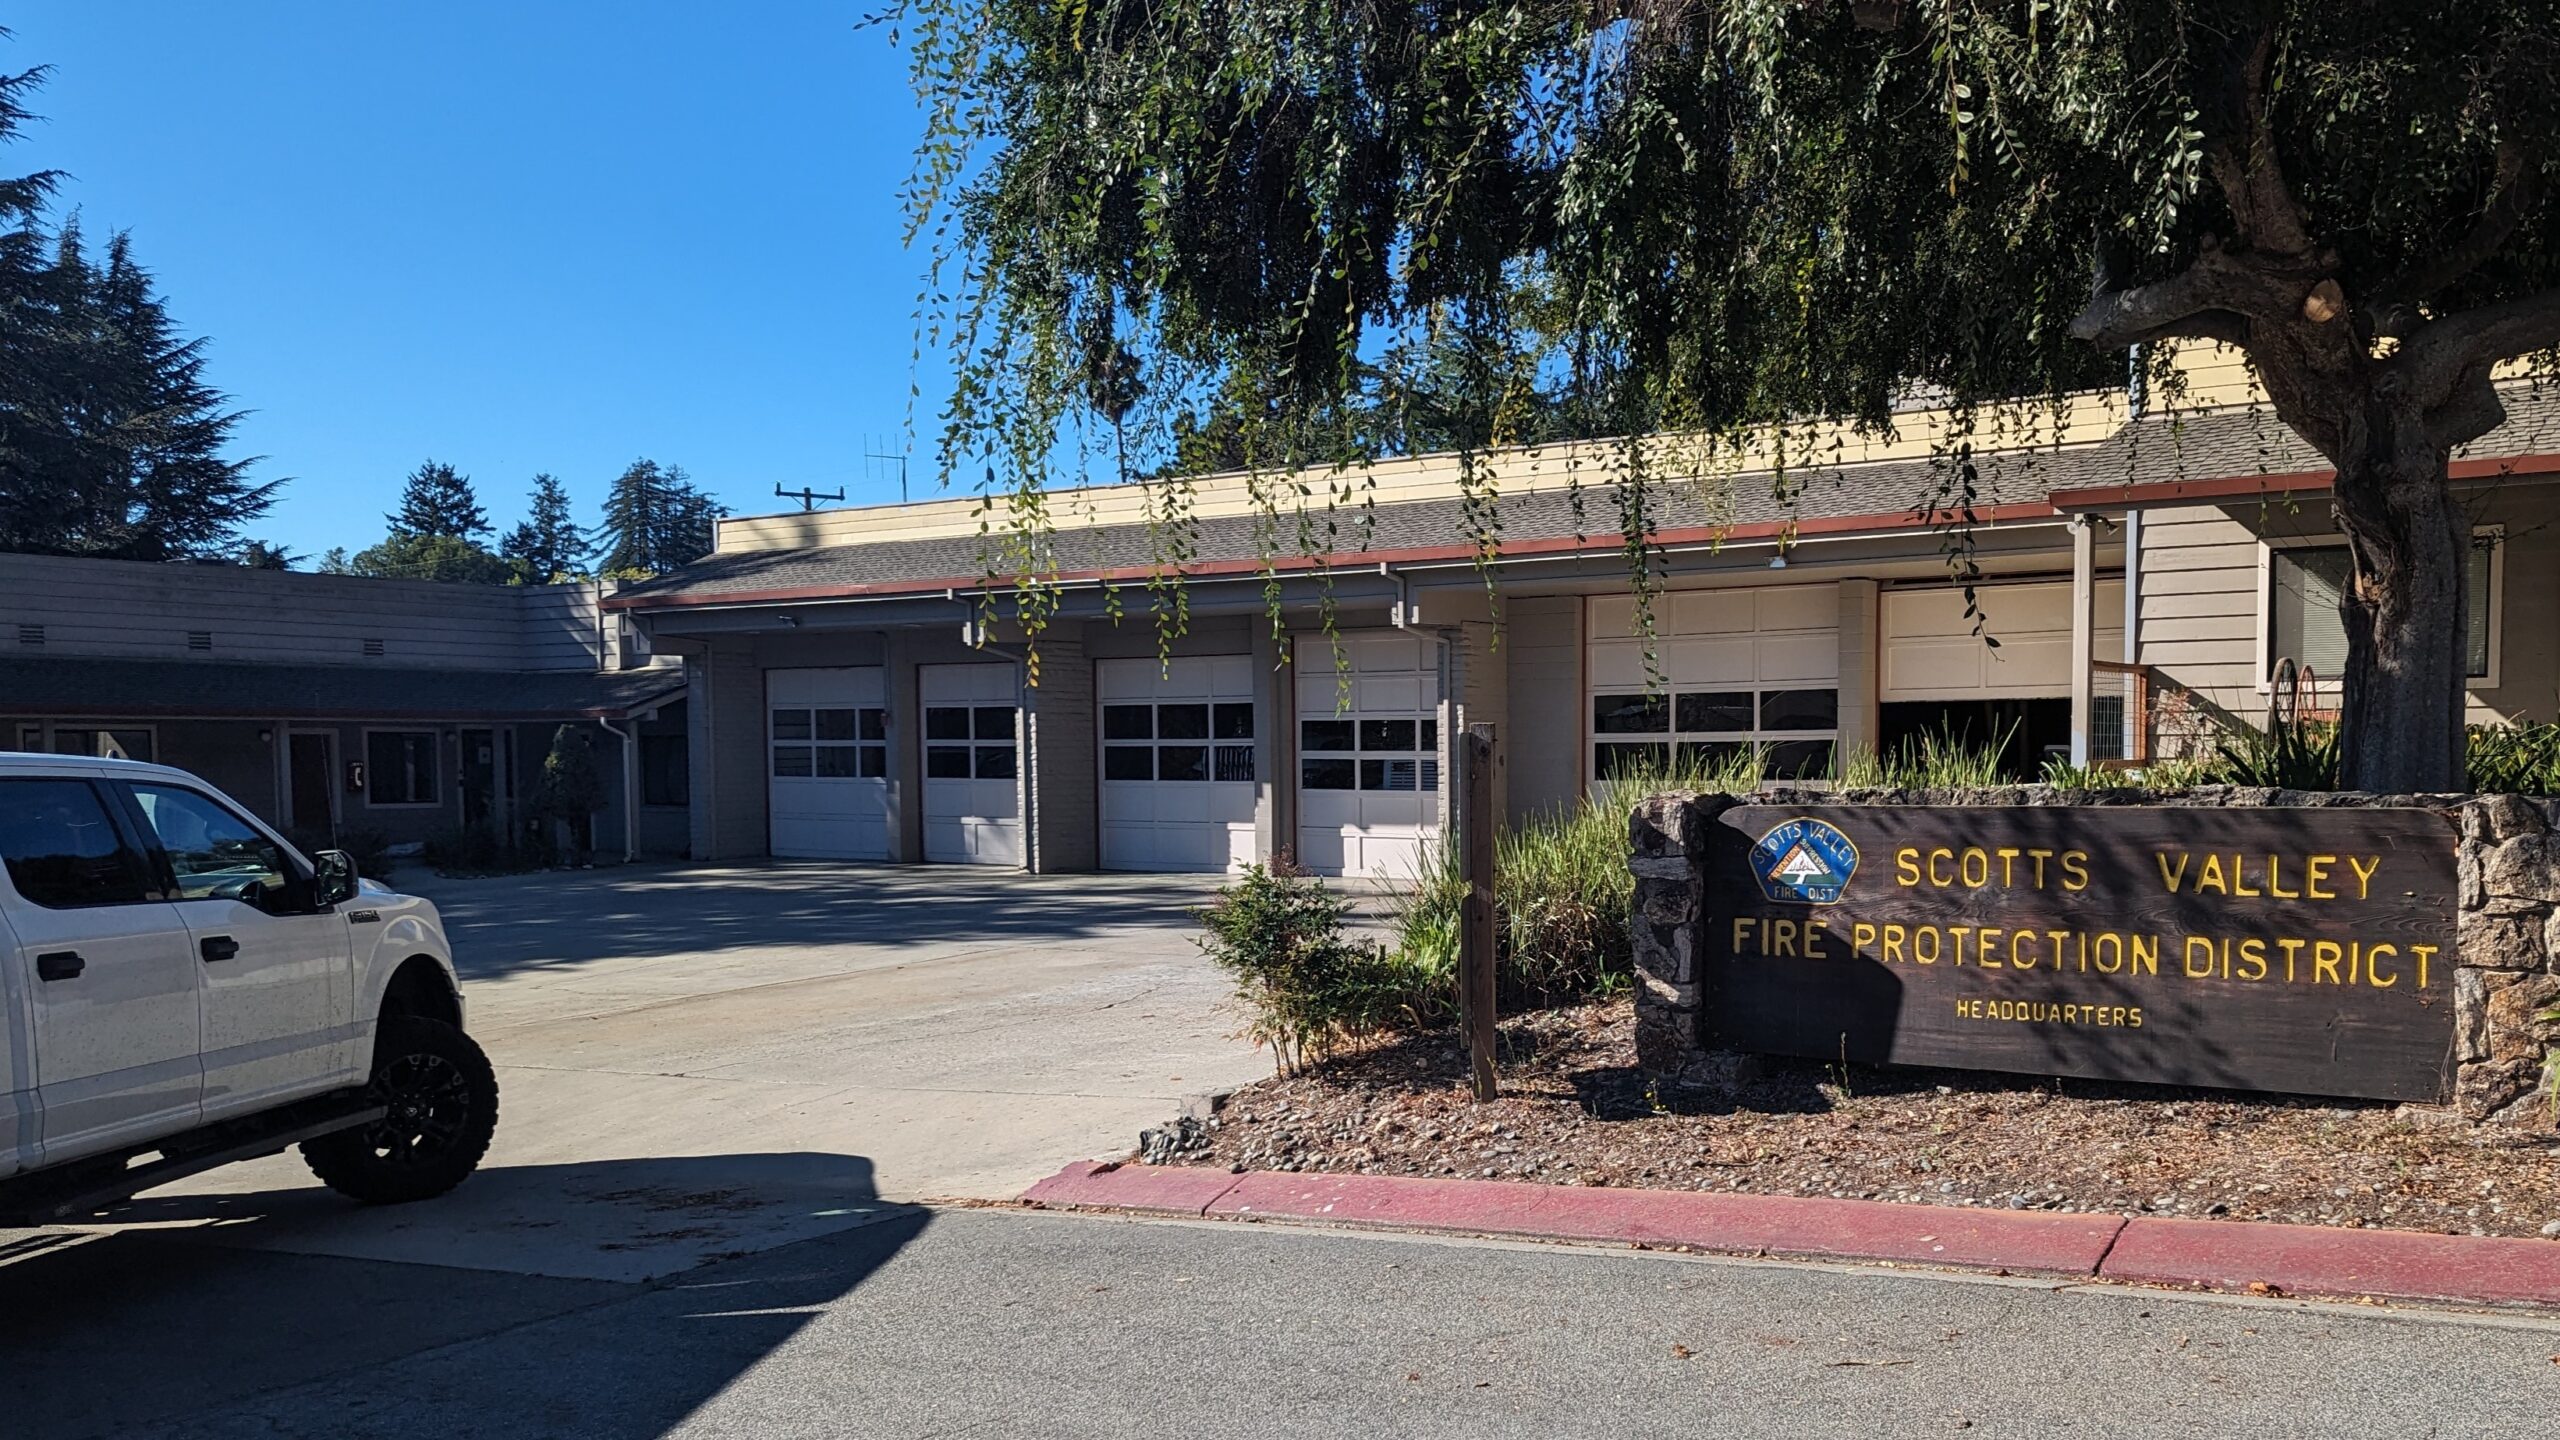 Scotts Valley Fire Protection District headquarters